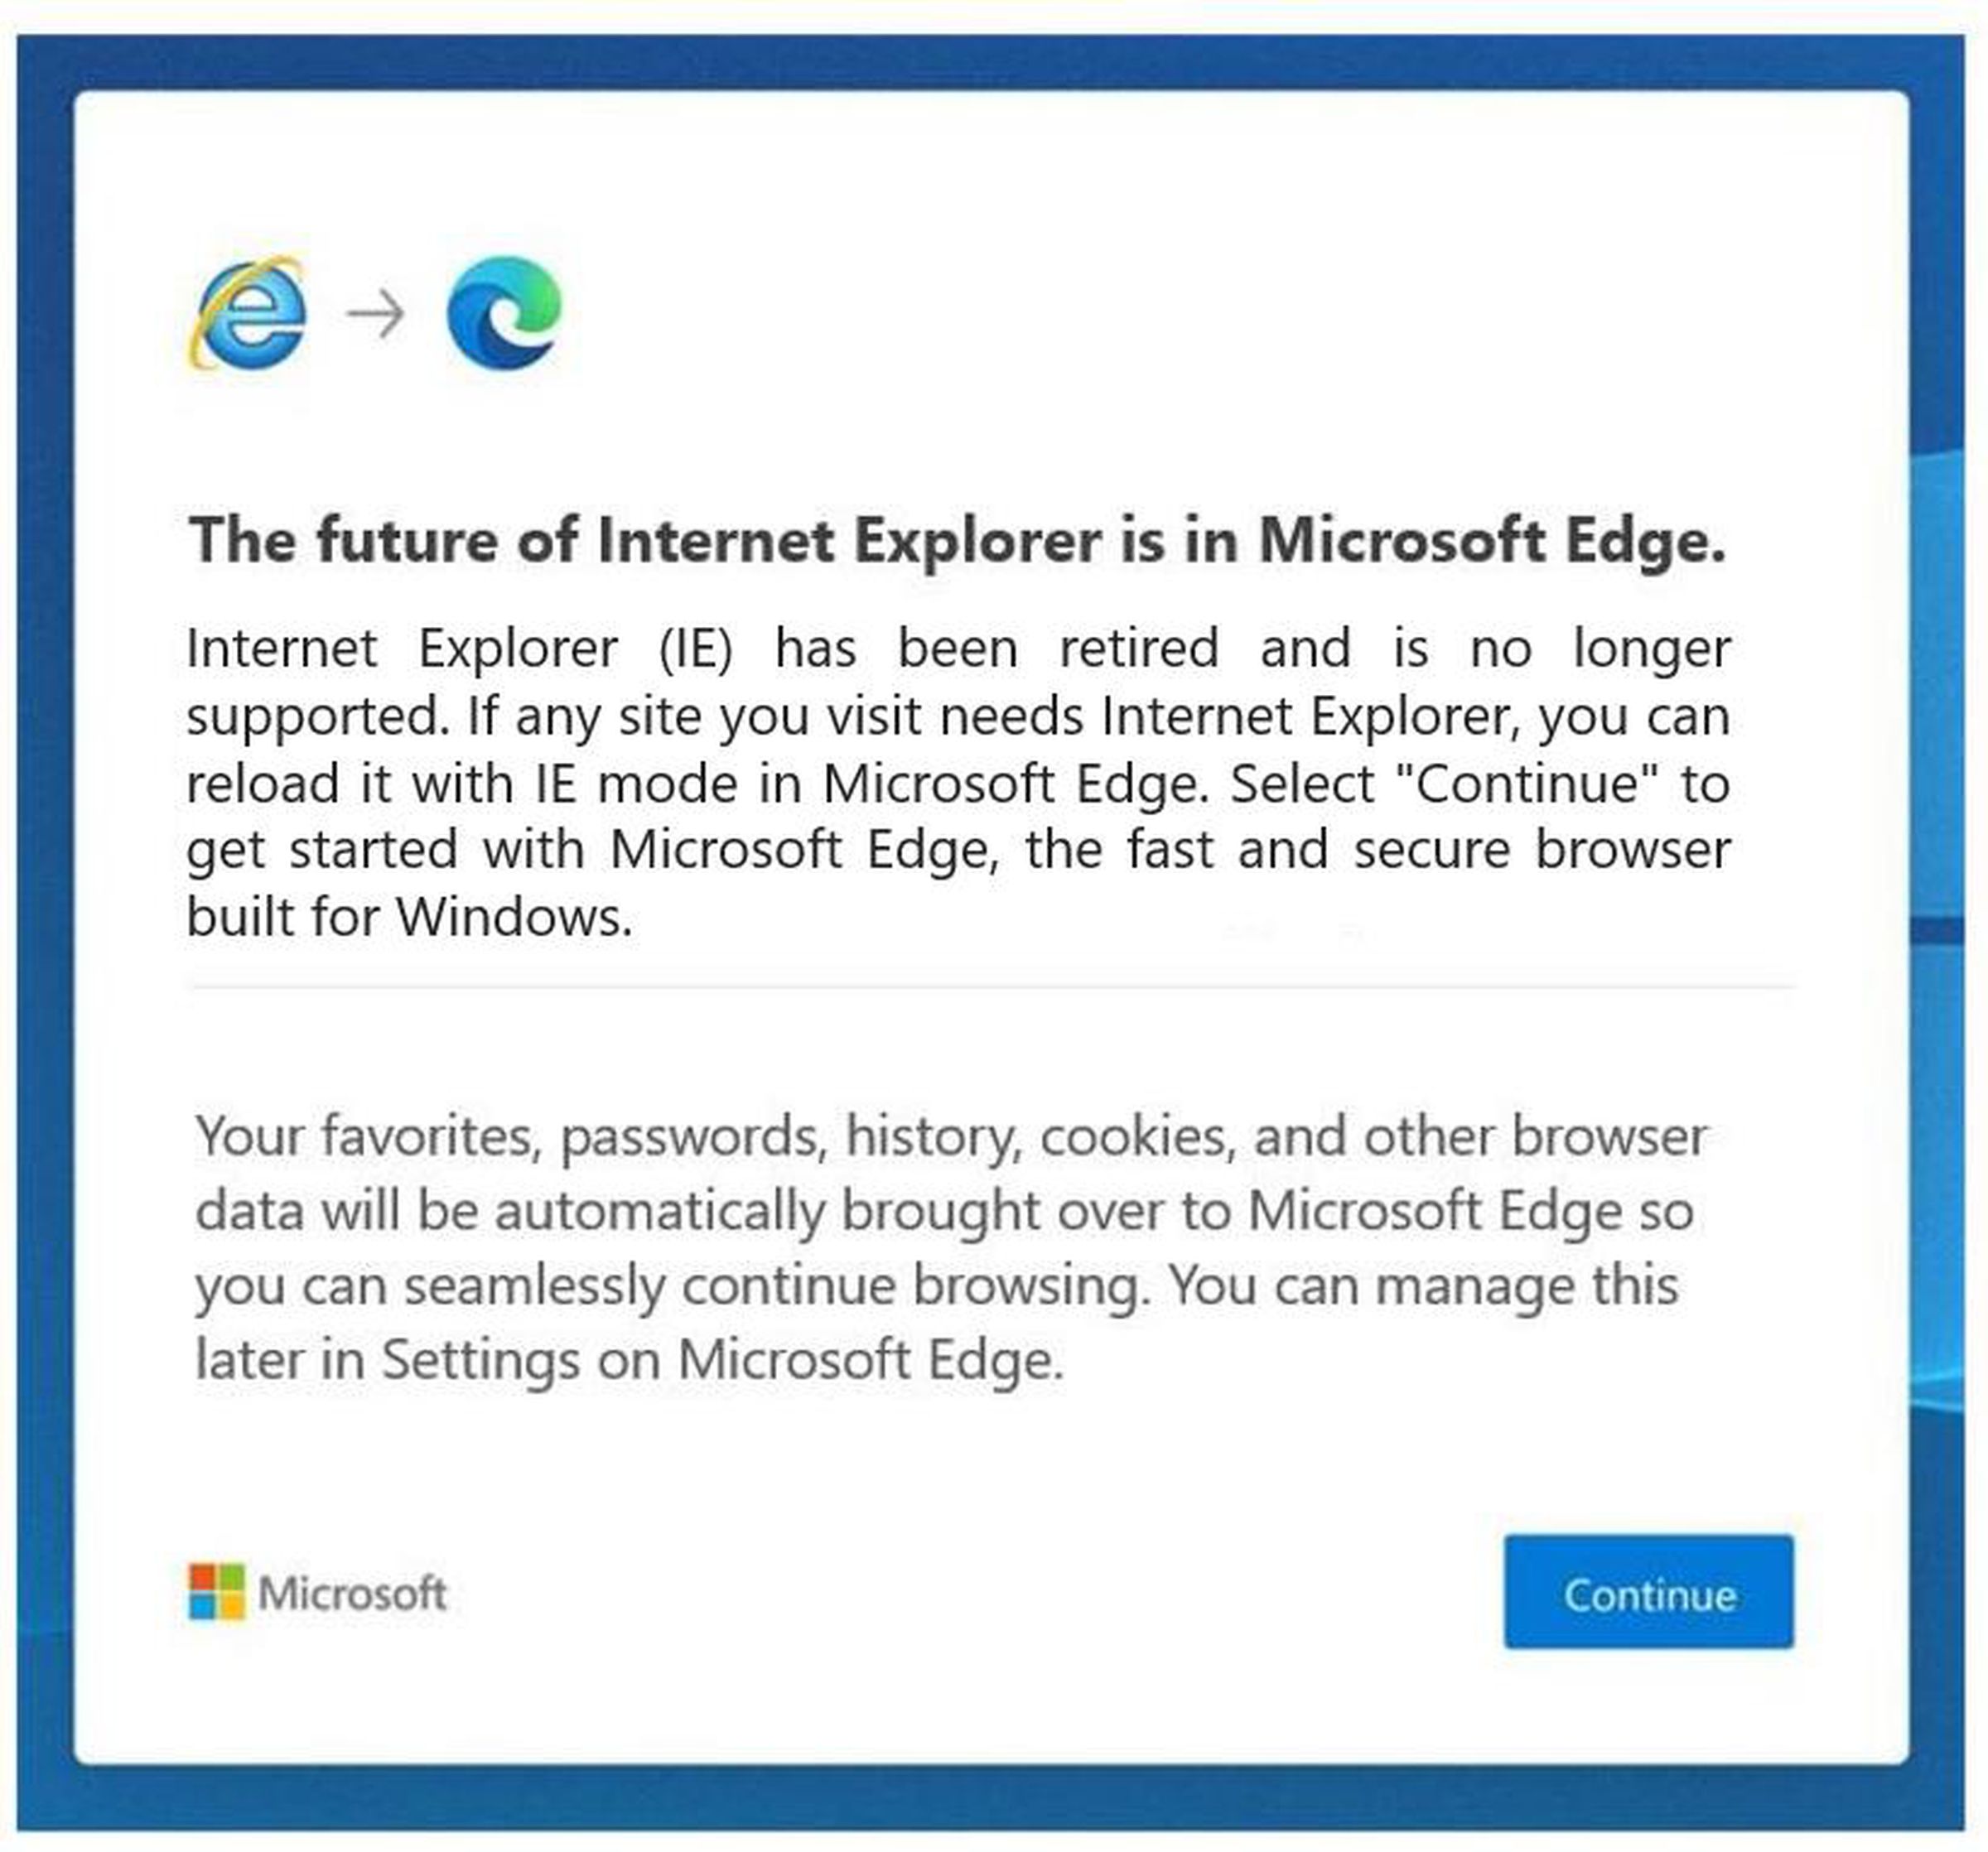 A new redirect for Internet Explorer users.